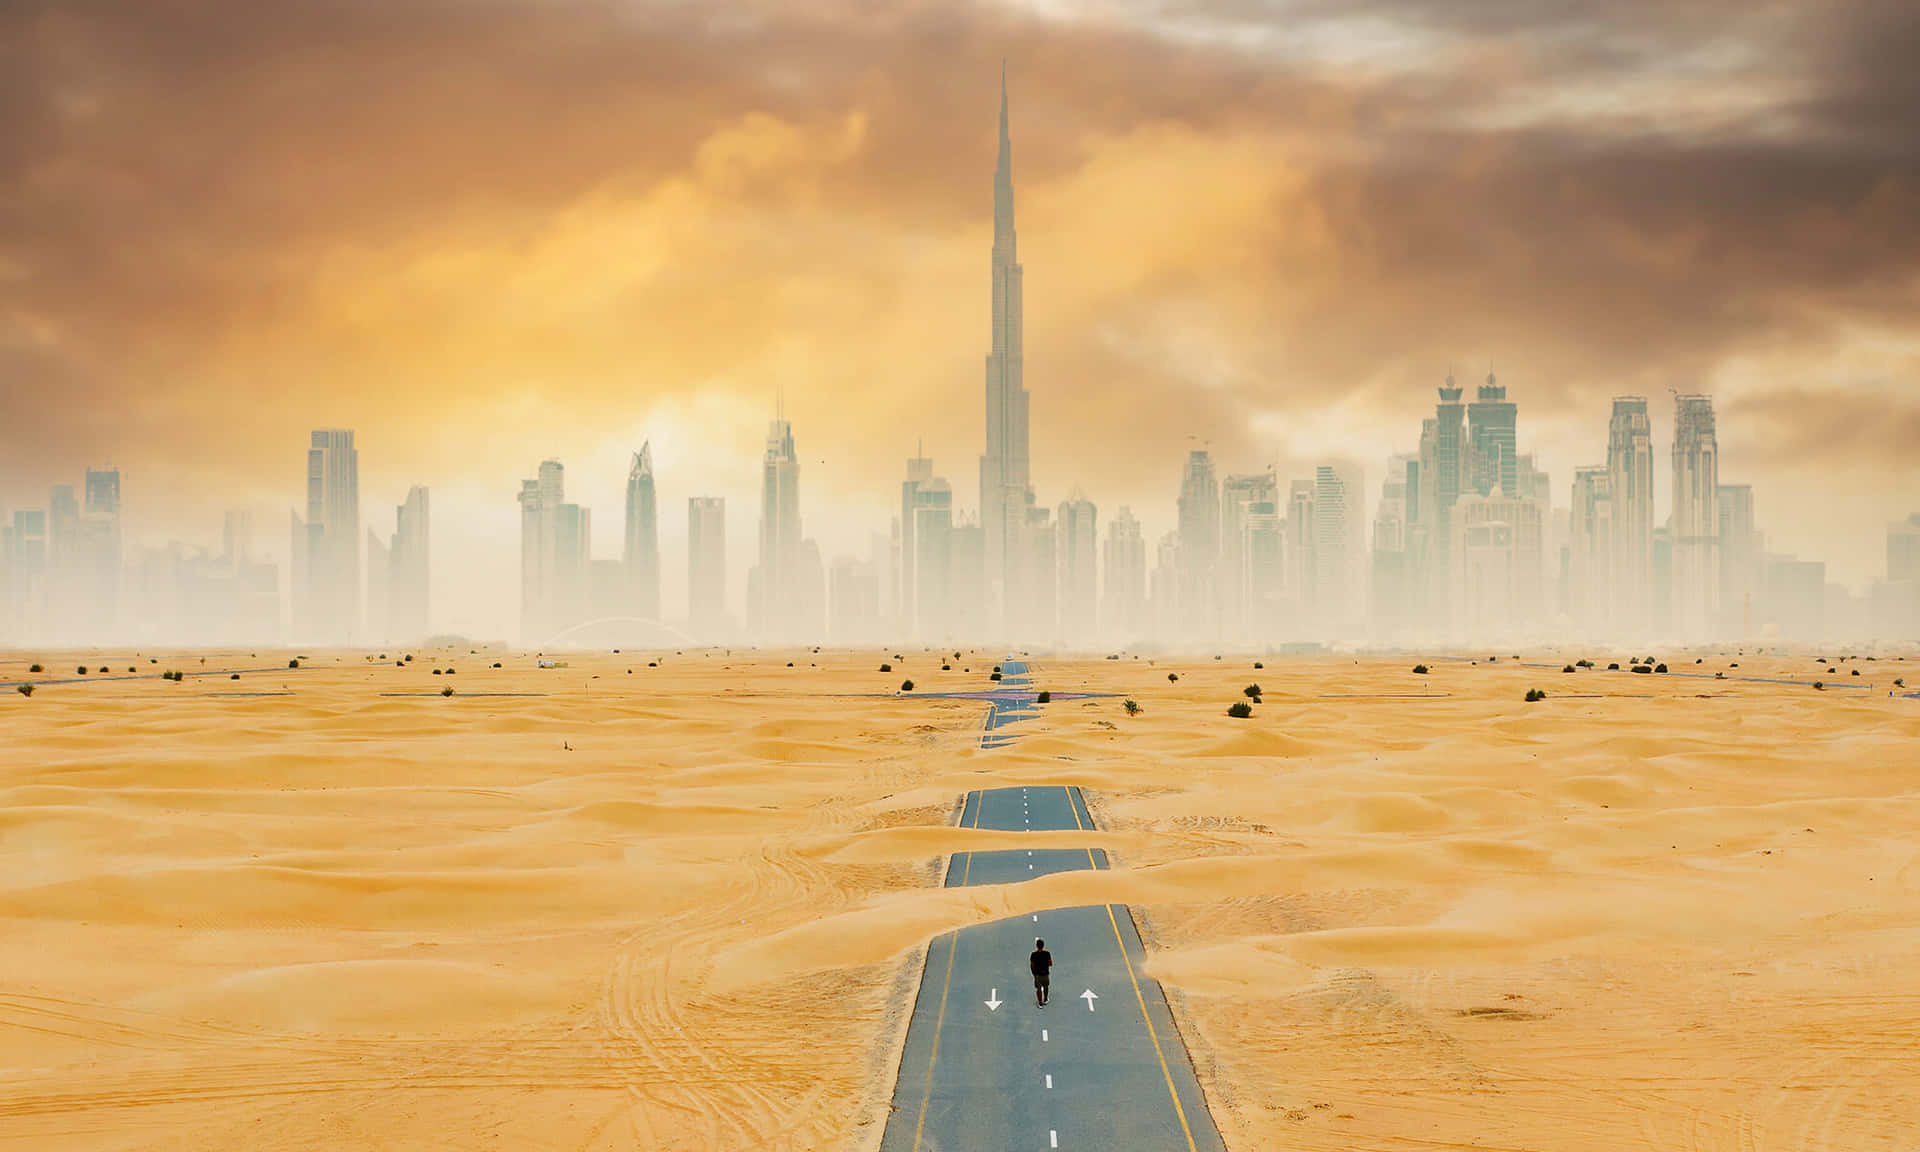 A Man Walking Down A Desert Road With A City In The Background